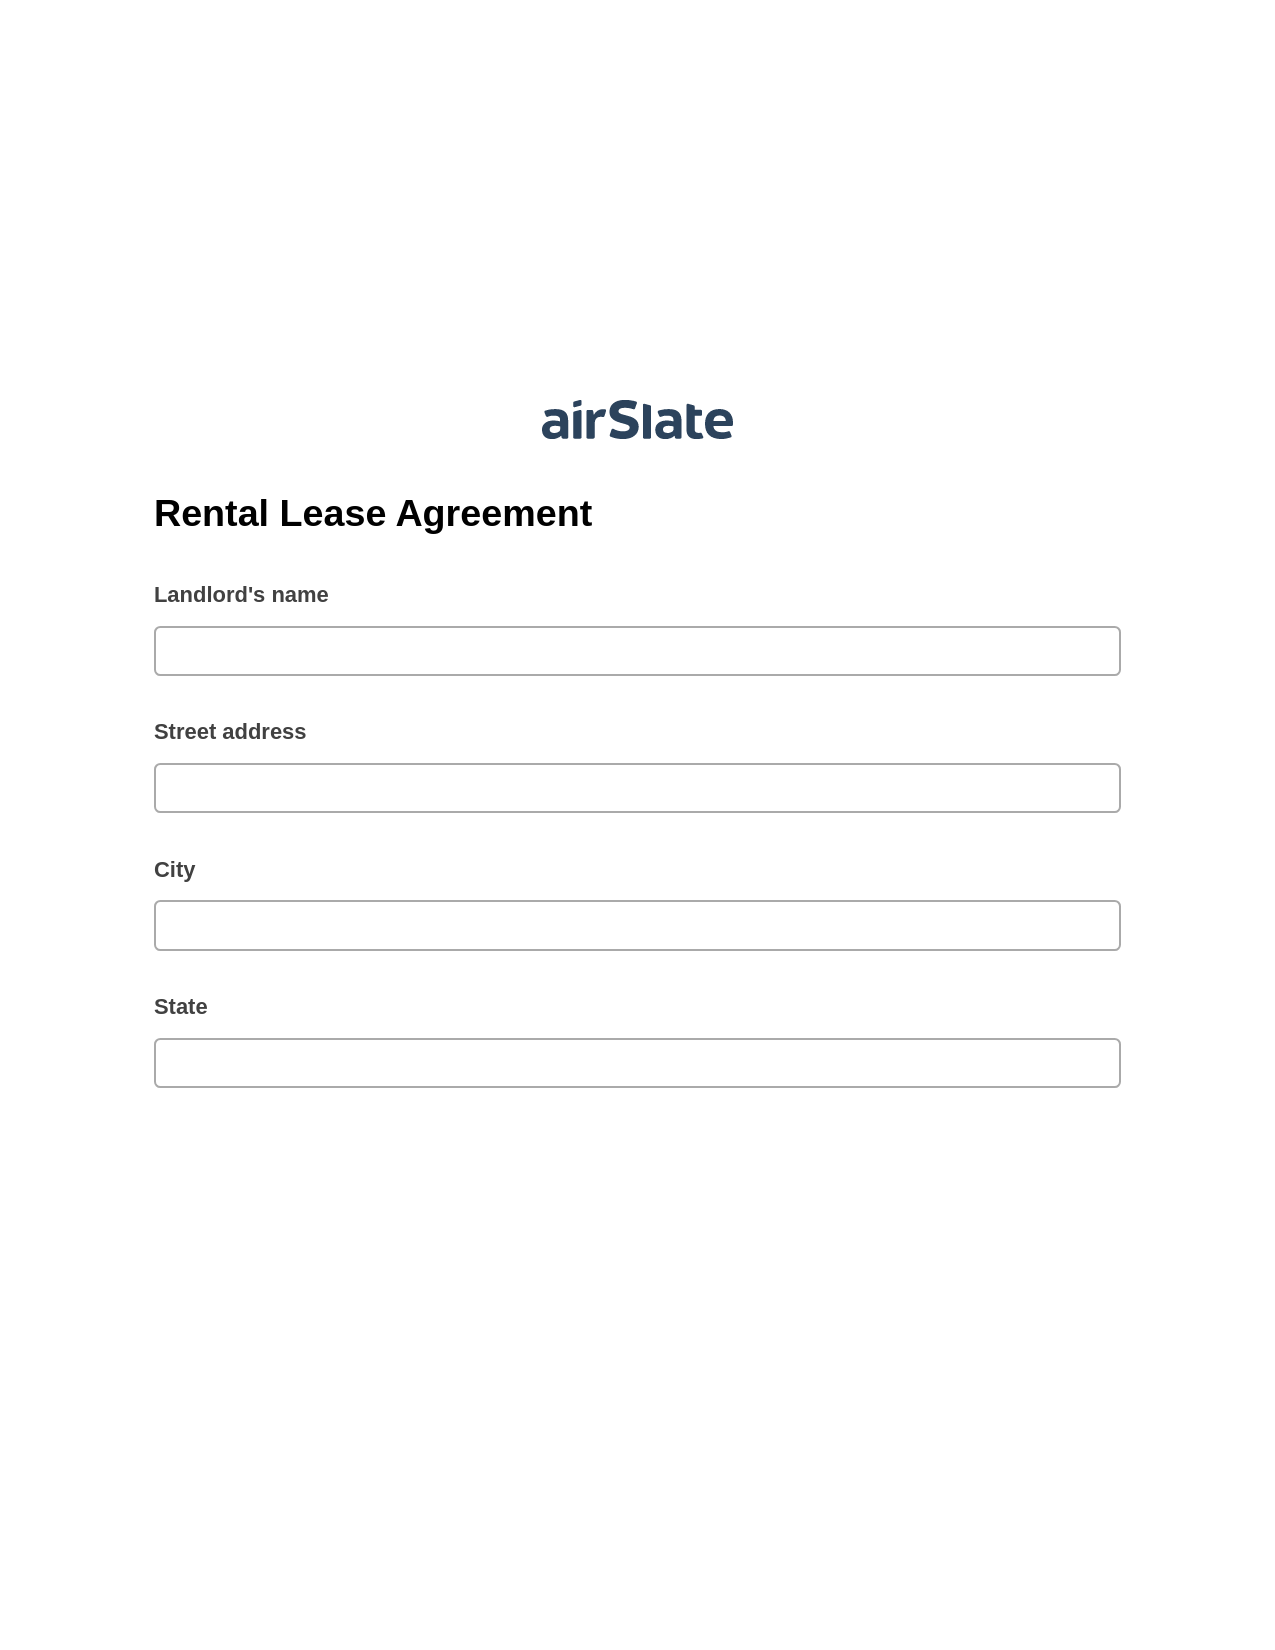 Rental Lease Agreement Pre-fill from Salesforce Records with SOQL Bot, Google Cloud Print Bot, Google Drive Bot